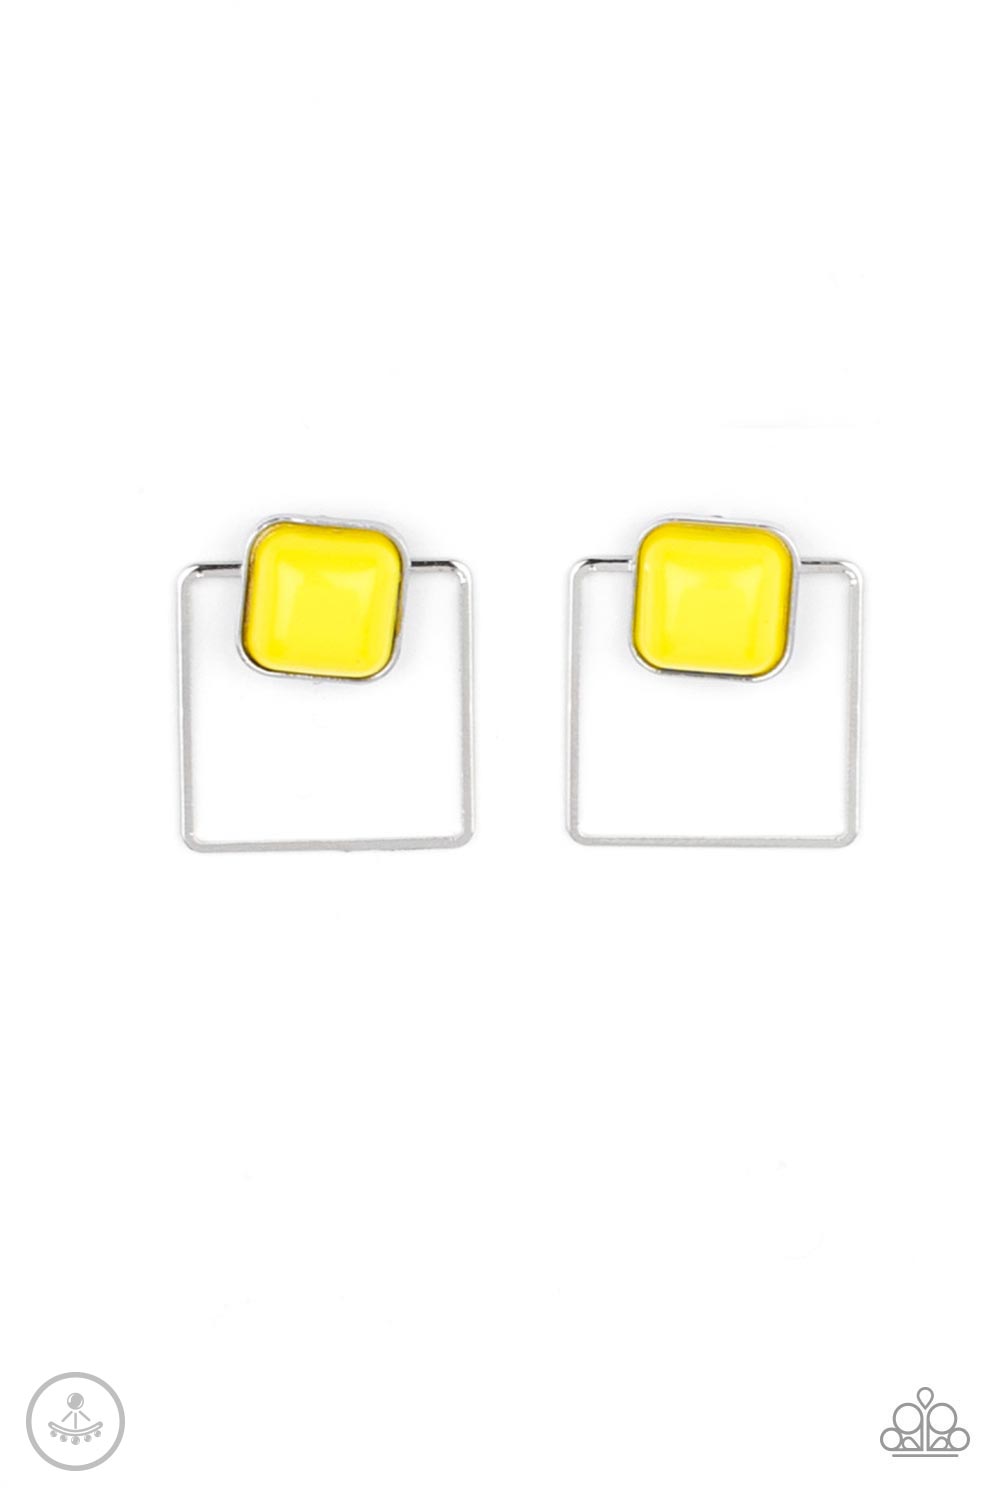 FLAIR and Square - Yellow Earrings